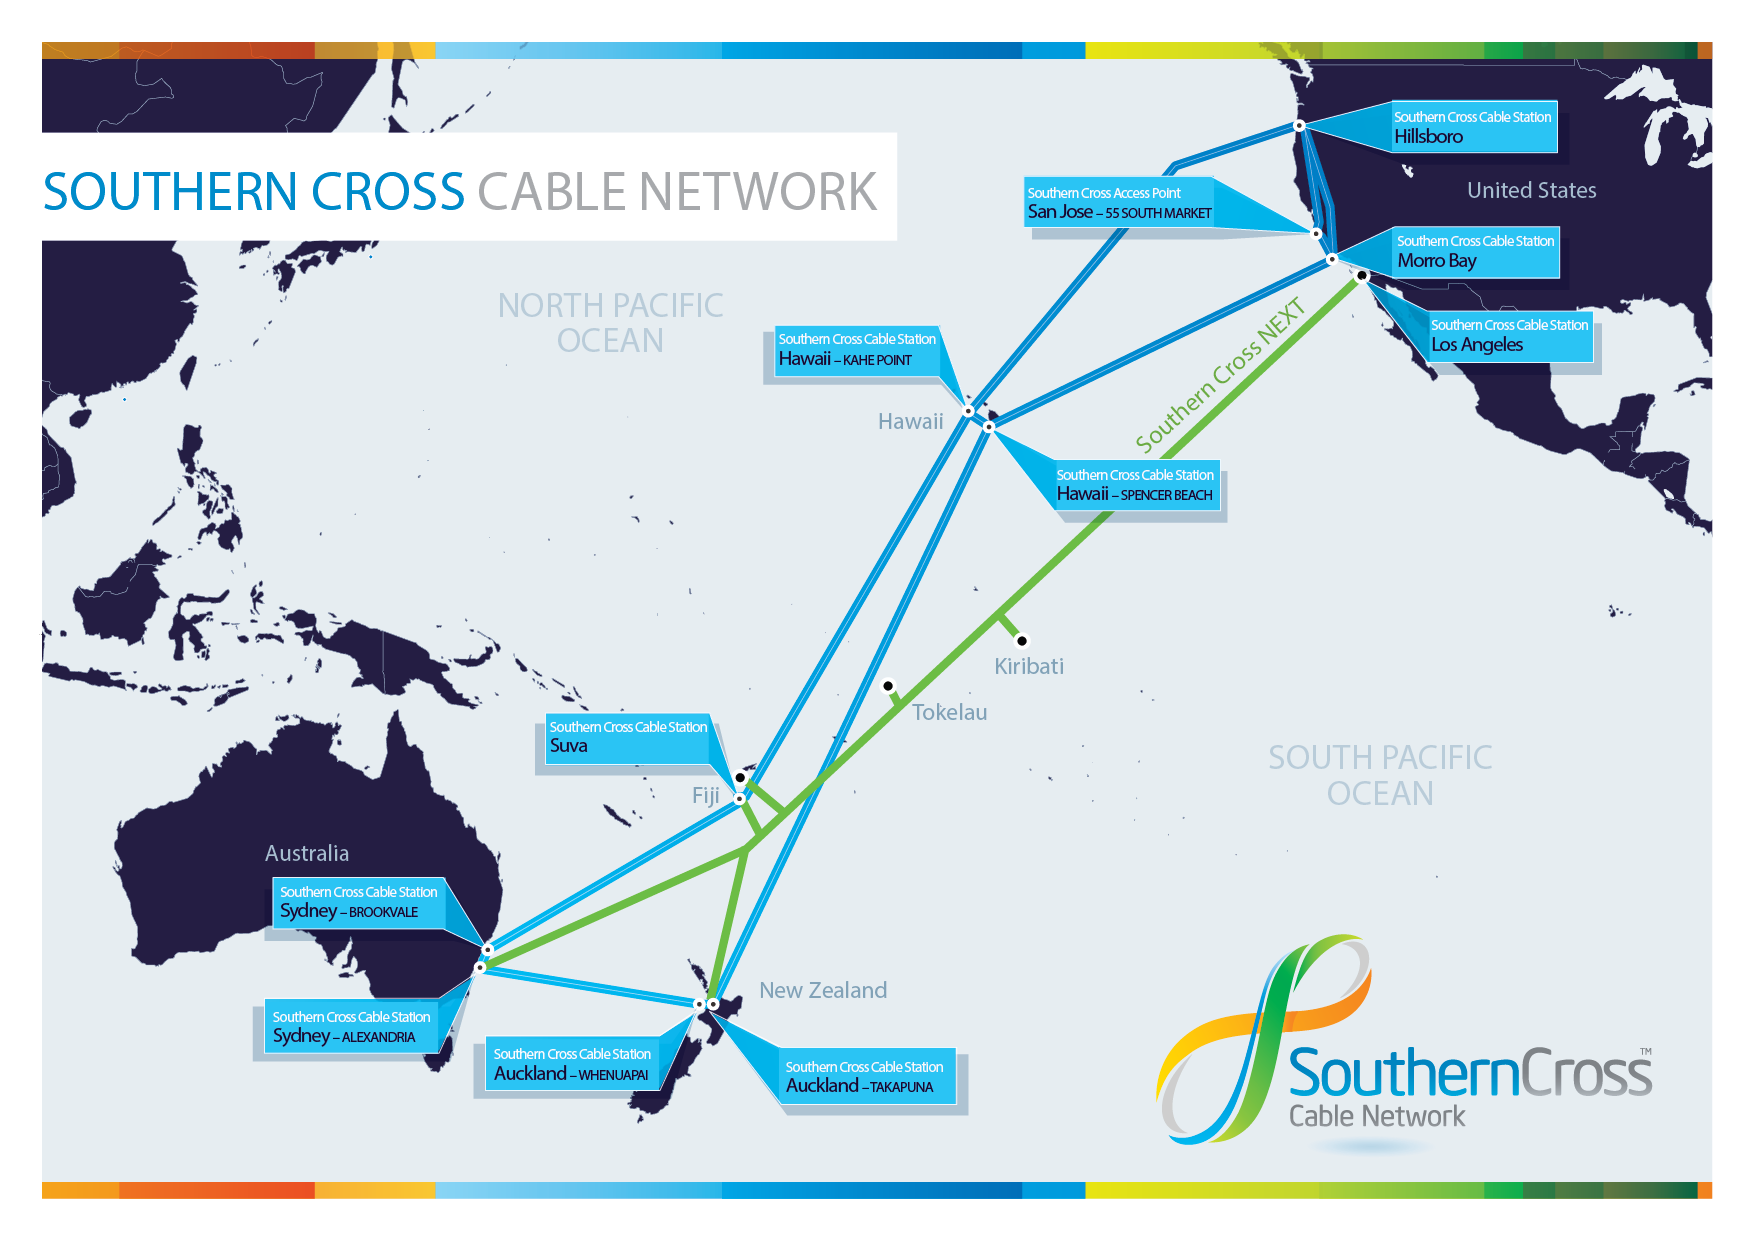 Southern Cross NEXT cable network